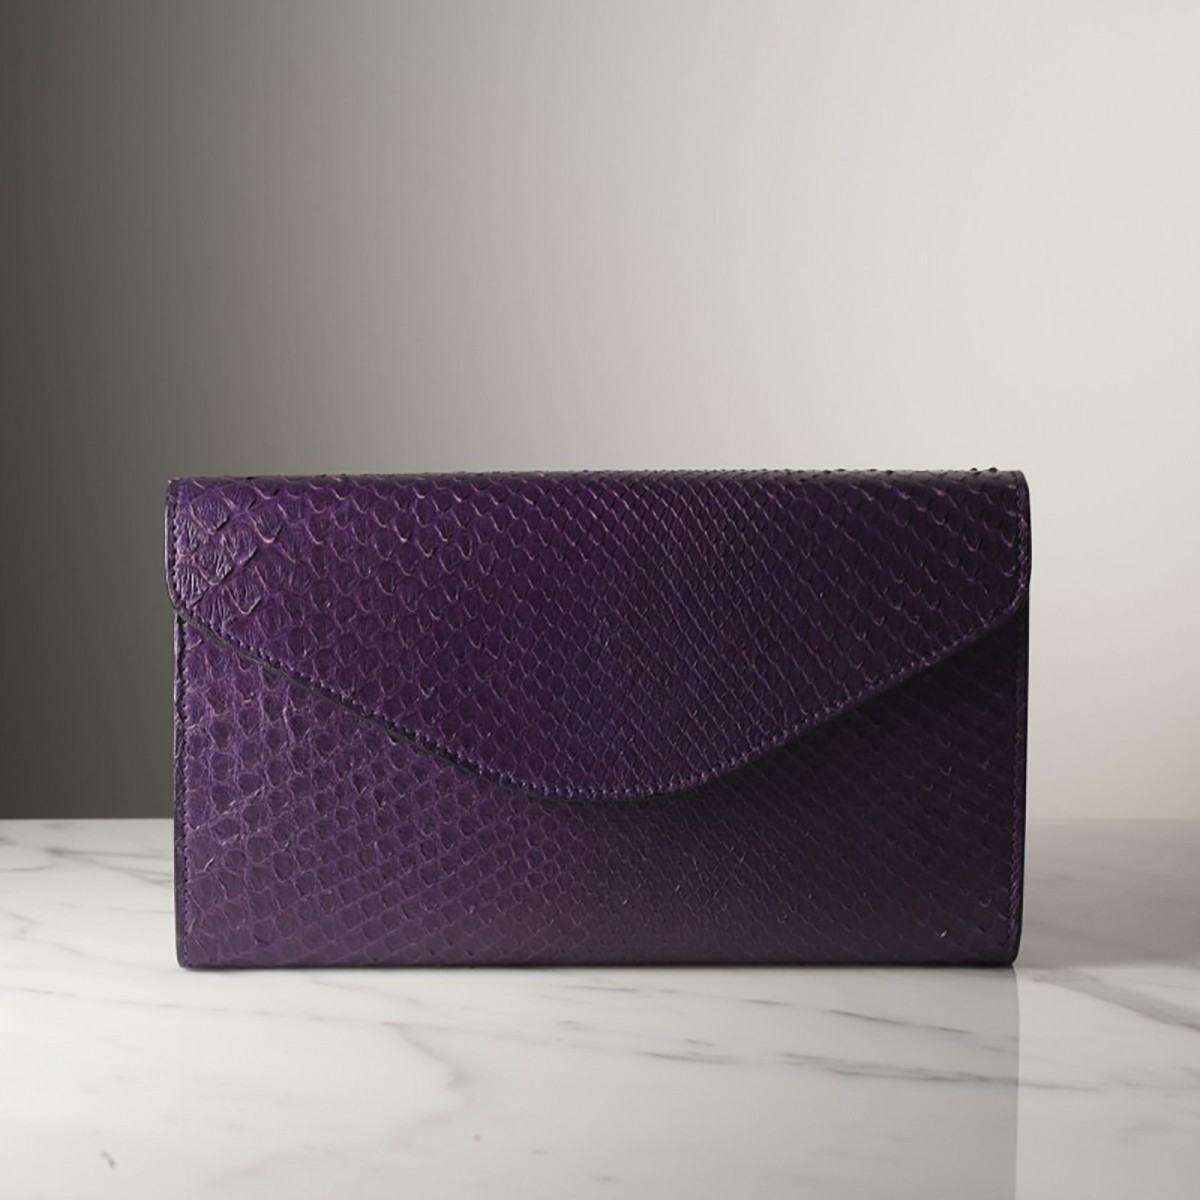 SIMONE - Python leather wallet, handmade in Italy